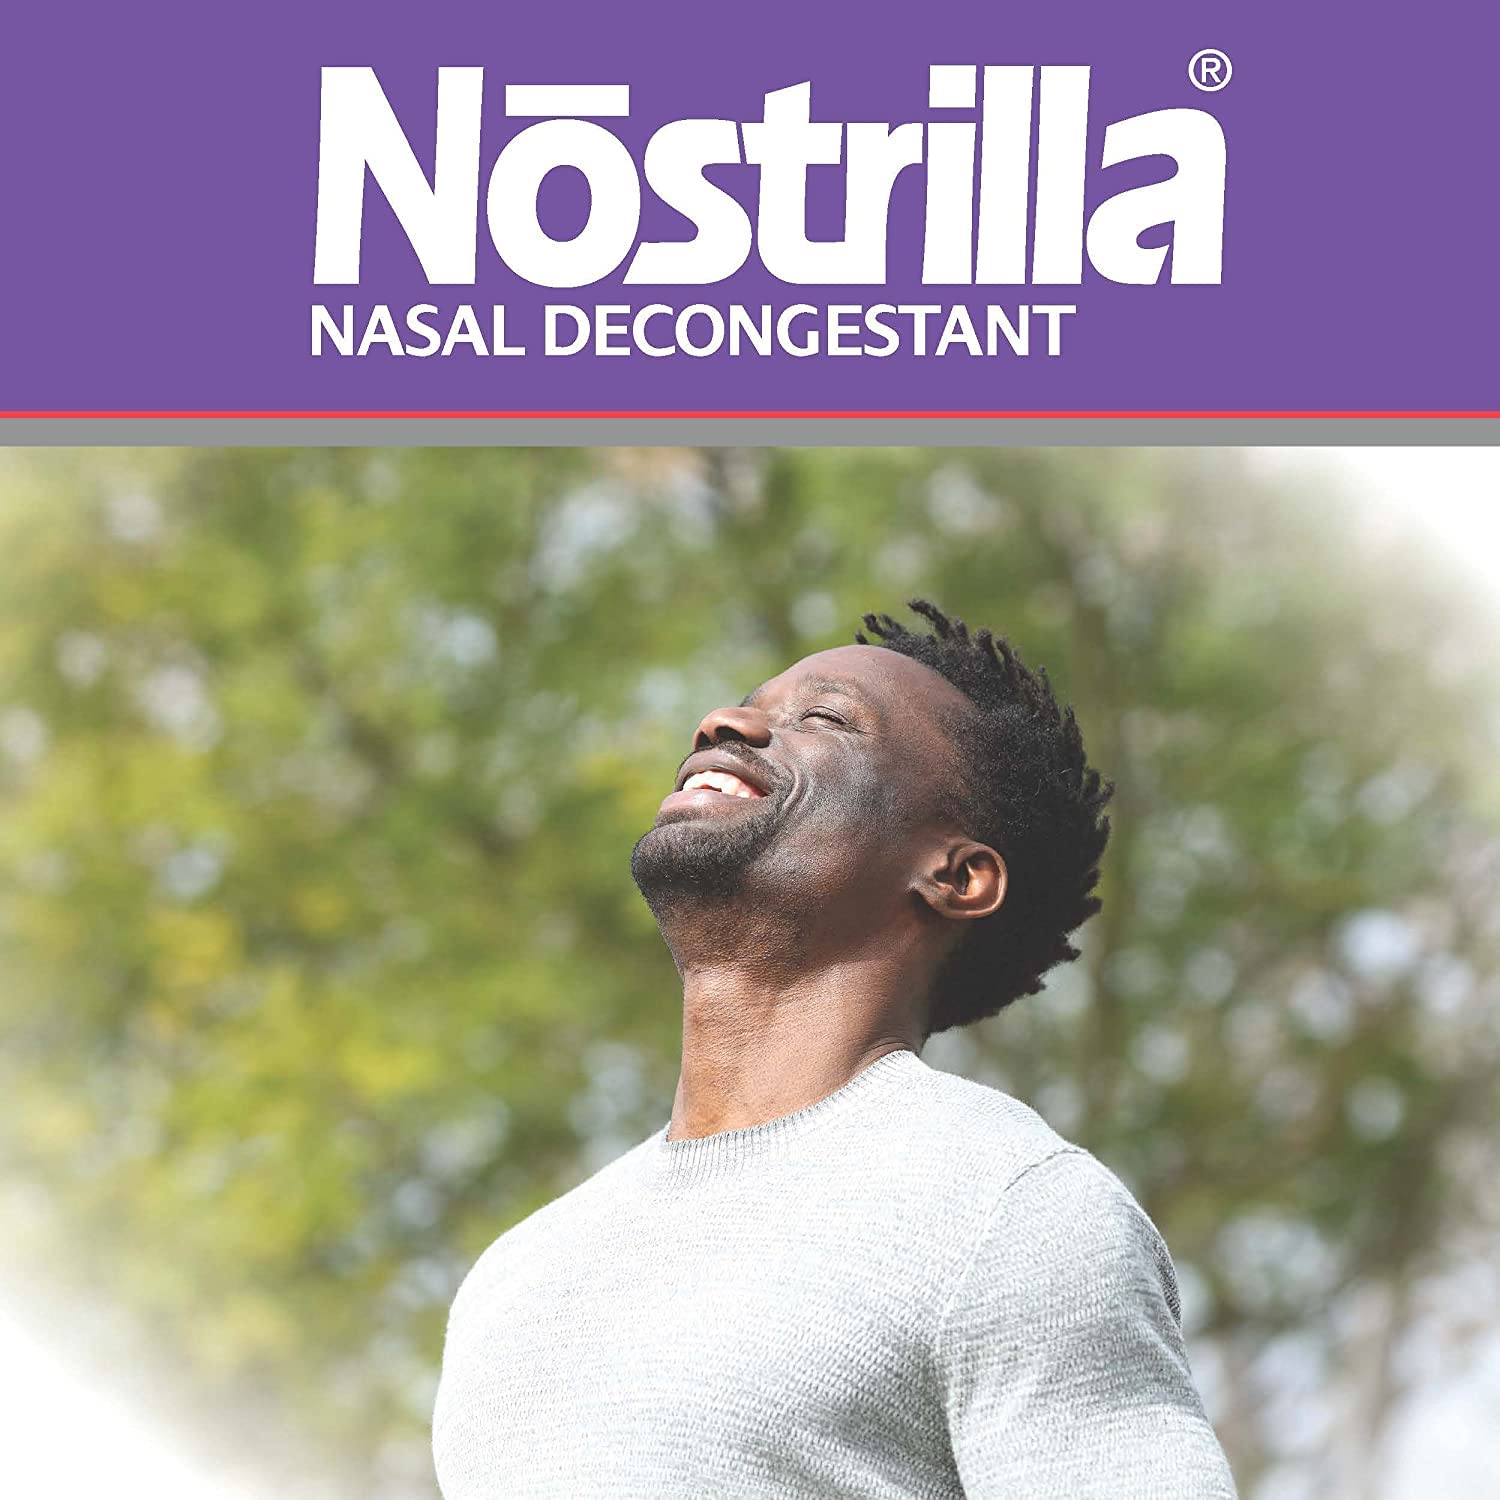 Nostrilla Nasal Decongestant | Effective Relief of Nasal Congestion | Up to 12 hours of Relief | 0.50 FL OZ Each | Pack of 3